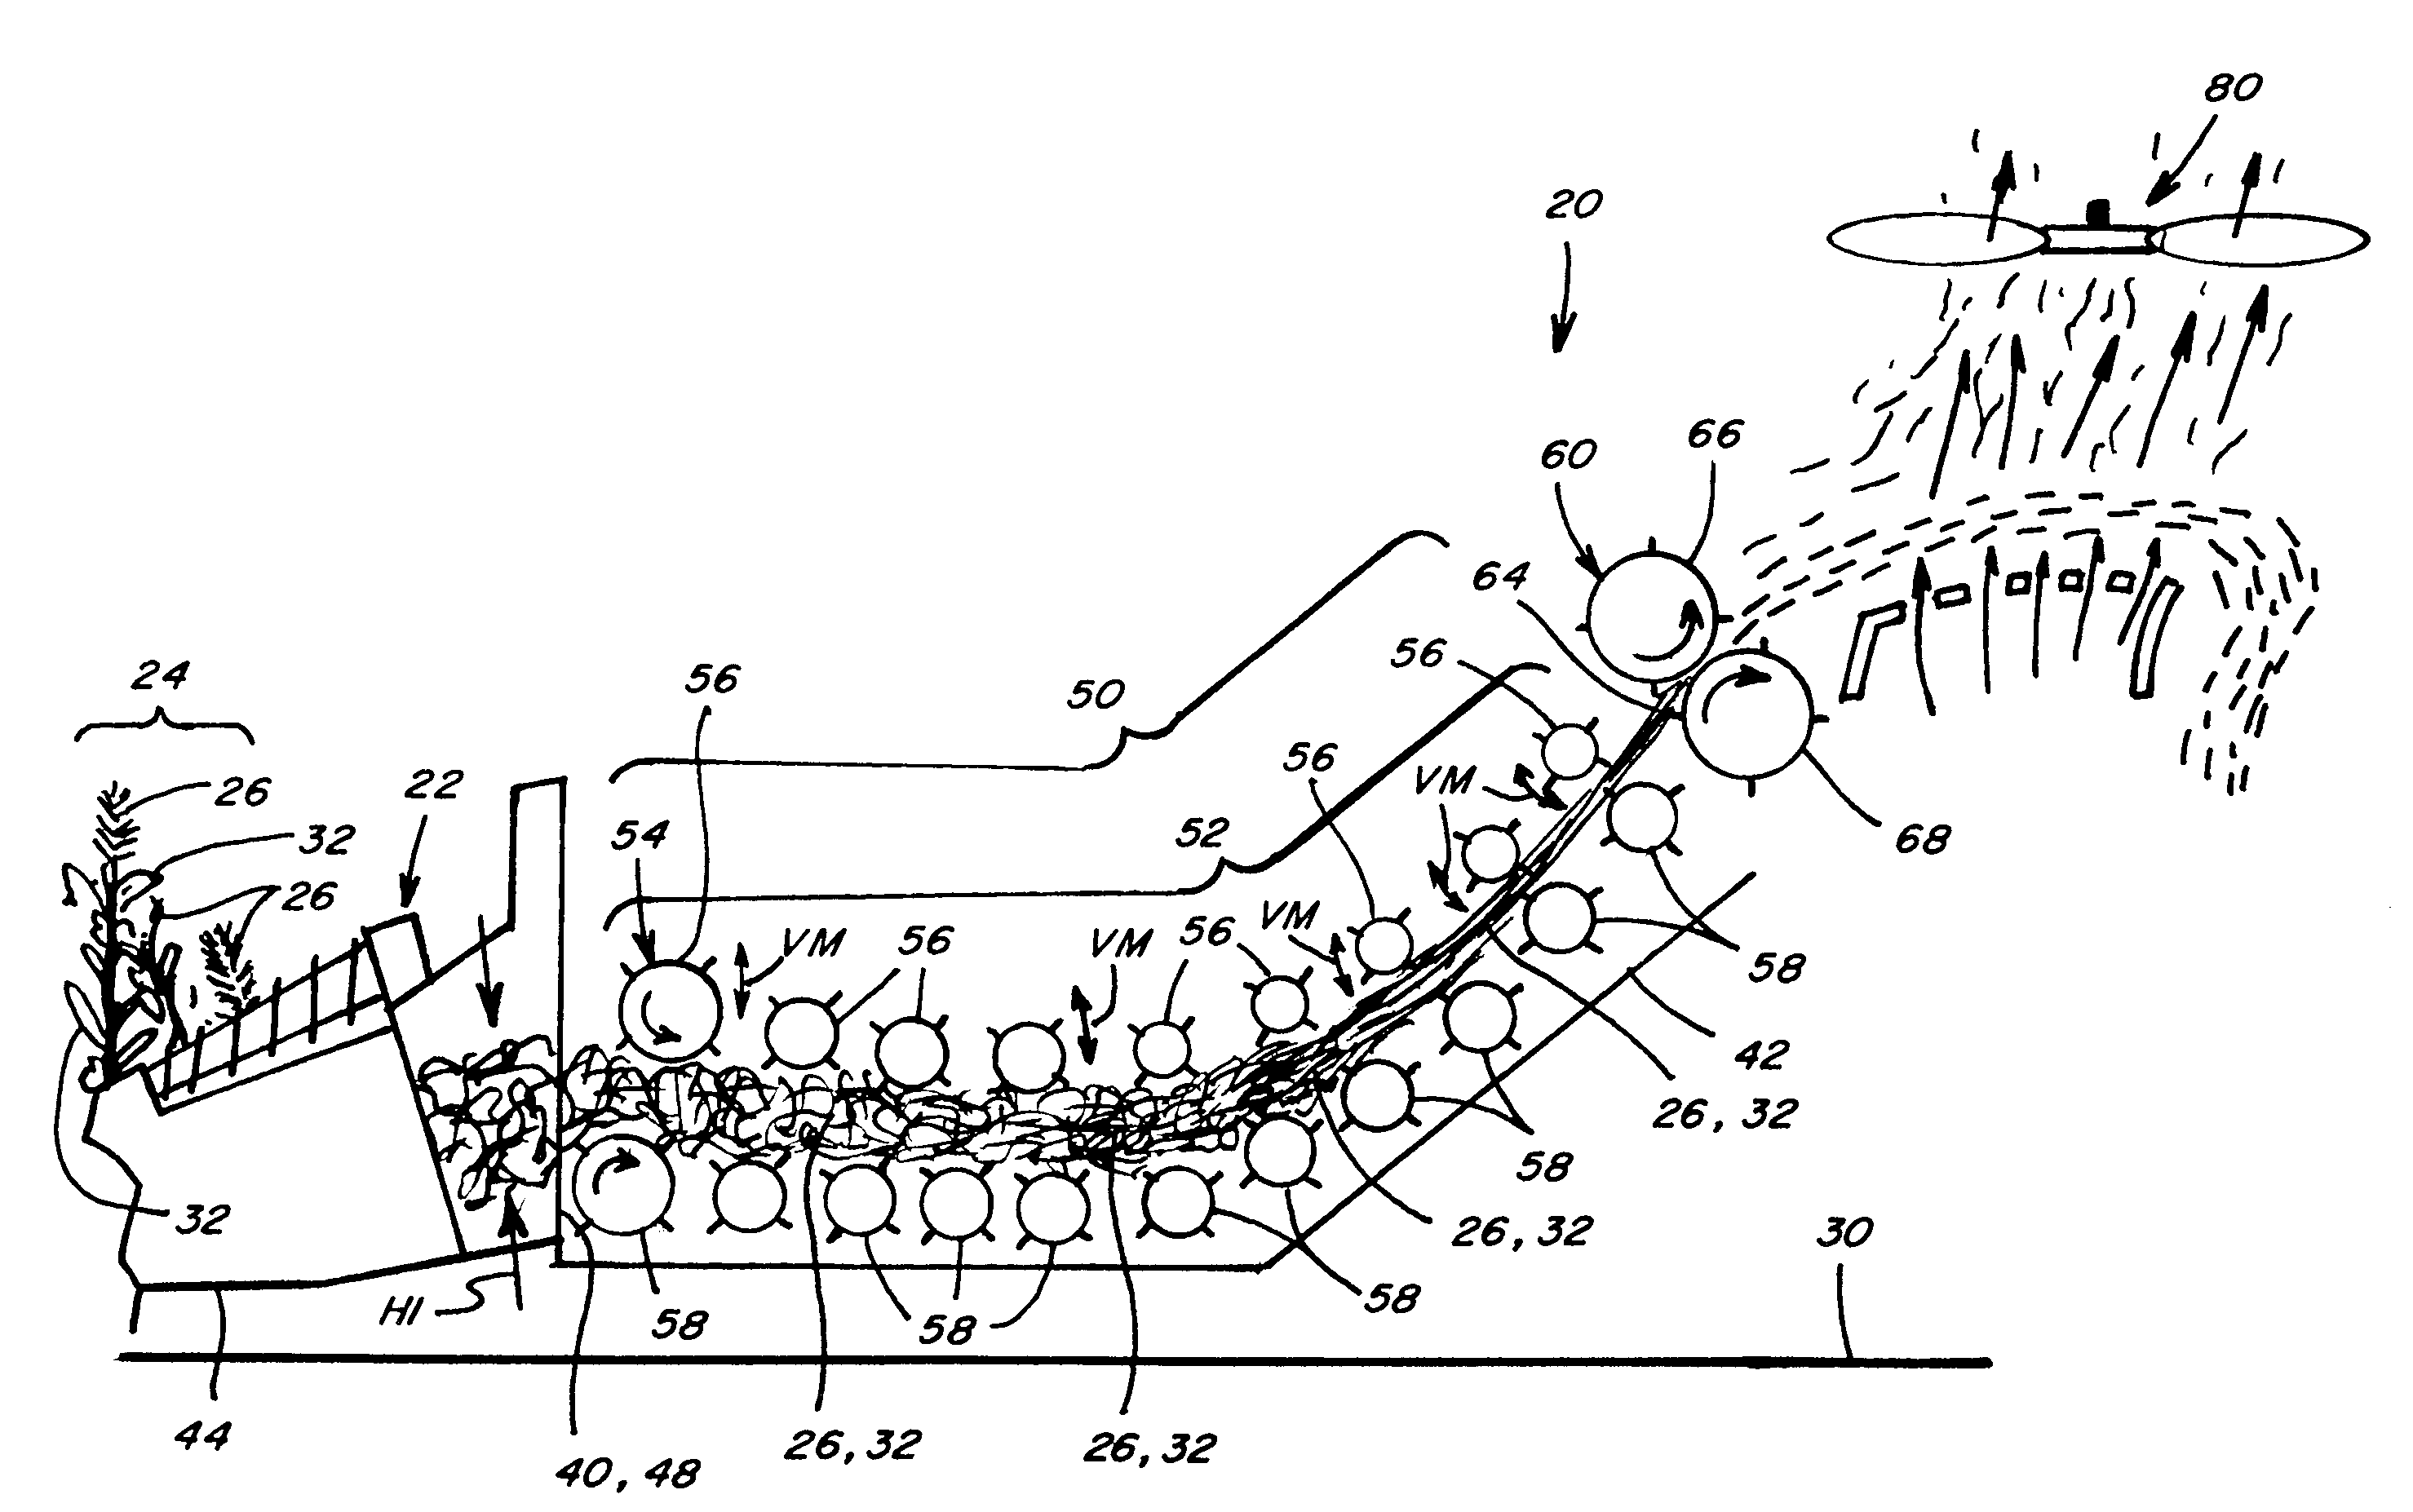 Row insensitive biomass harvesting and billeting system and method